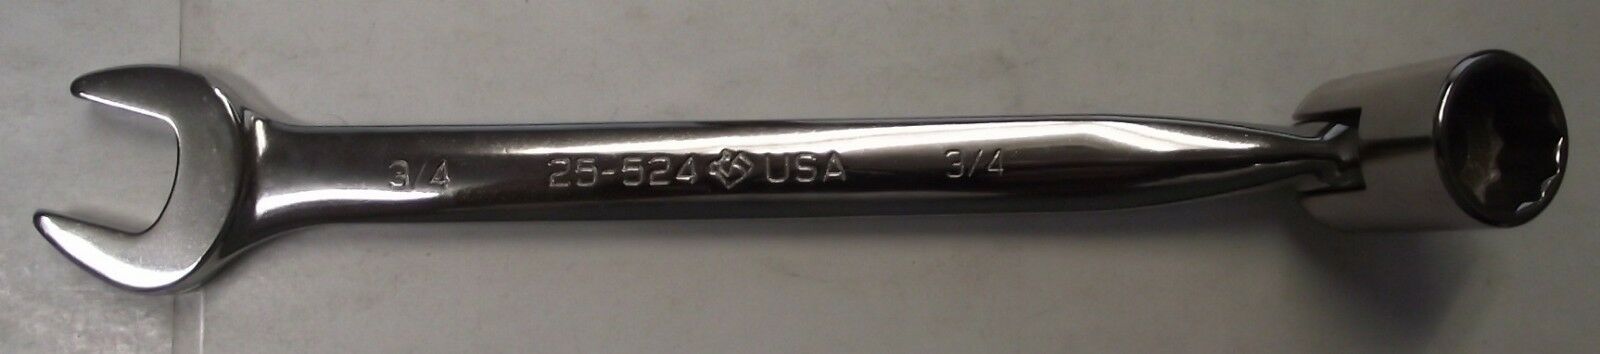 Armstrong 25-524 3/4" Combination Open End Socket Wrench USA